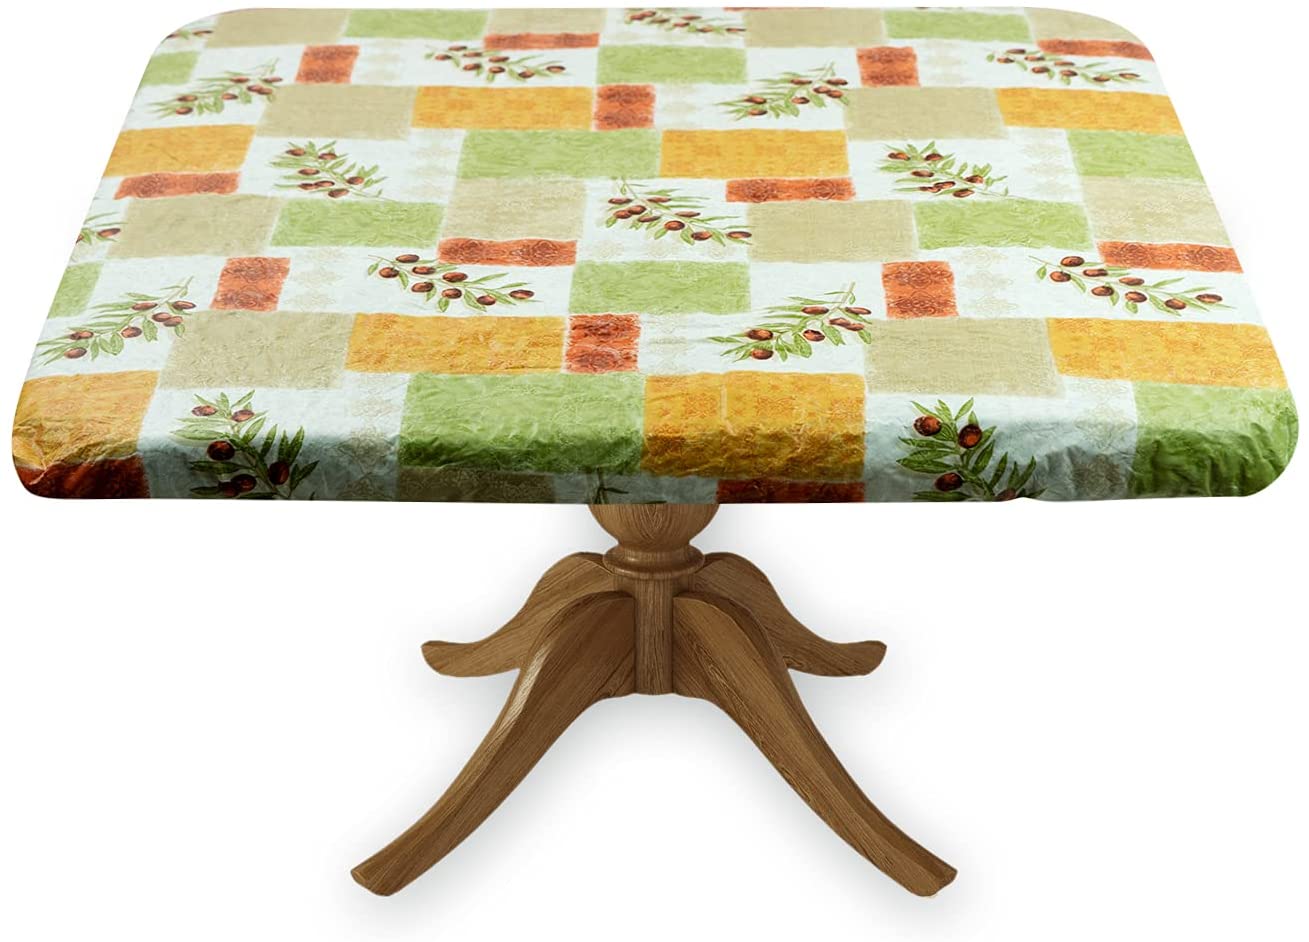 Covers For The Home Deluxe Elastic Edged Flannel Backed Vinyl Fitted Table Covers <em style="color: red ">BEST SELLER</em>